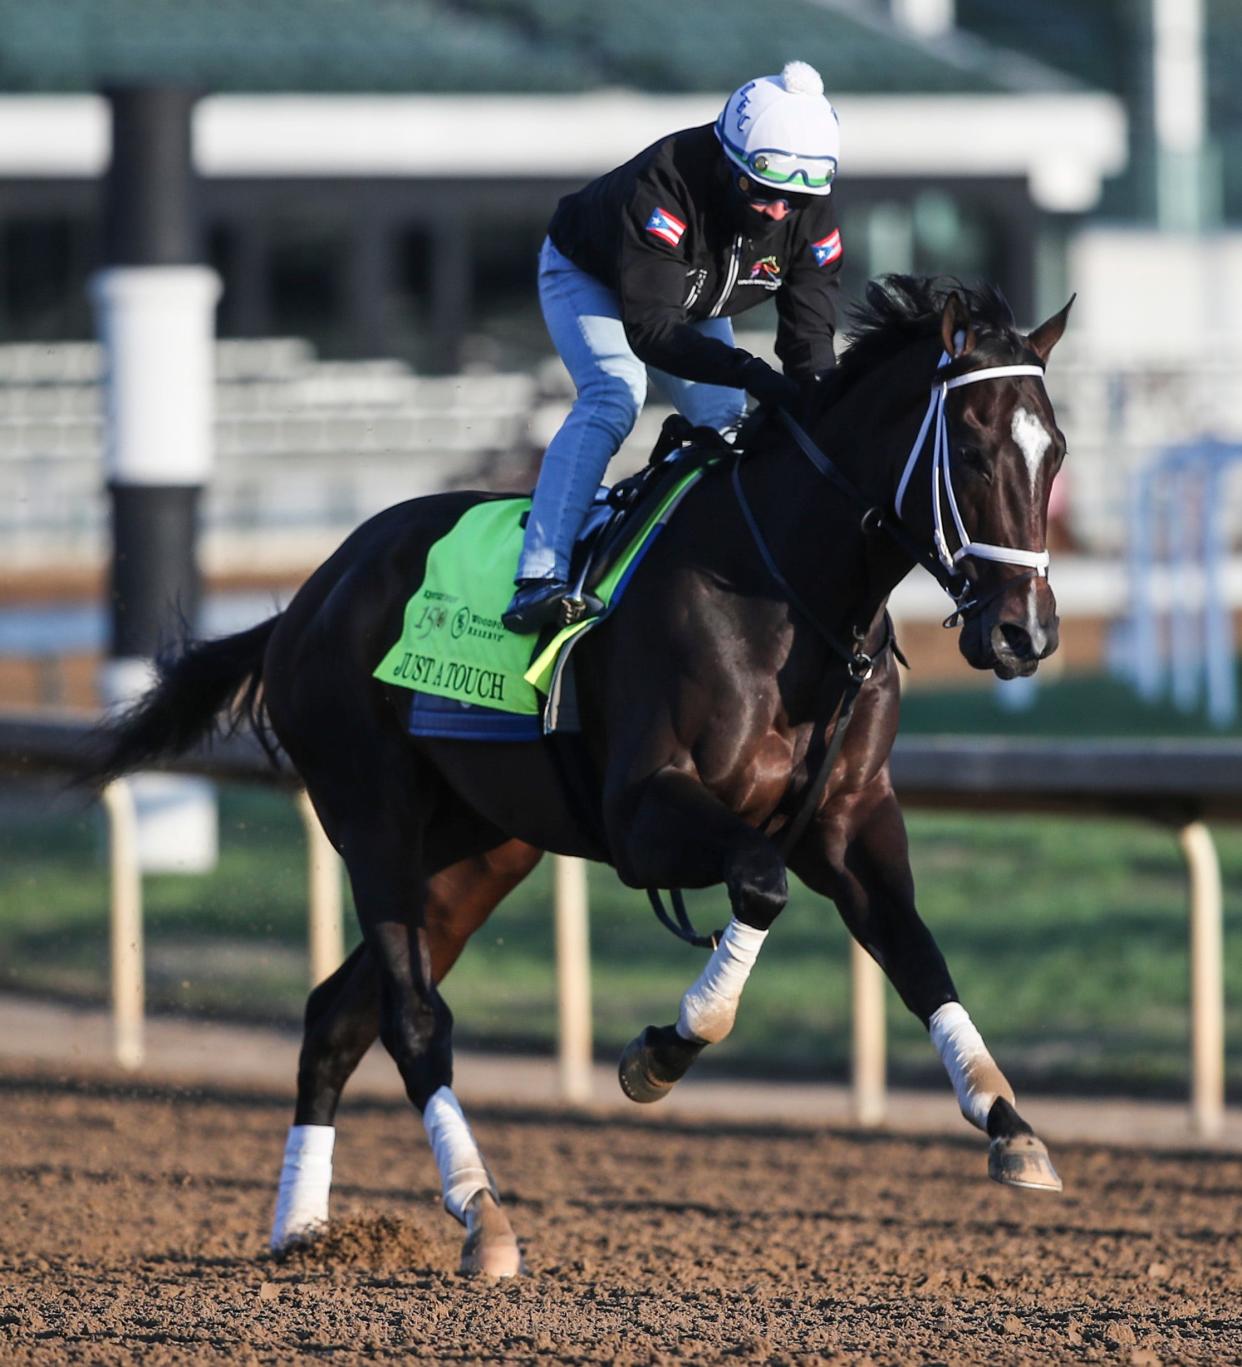 Kentucky Derby horse Just a Touch works out April 25 at Churchill Downs.